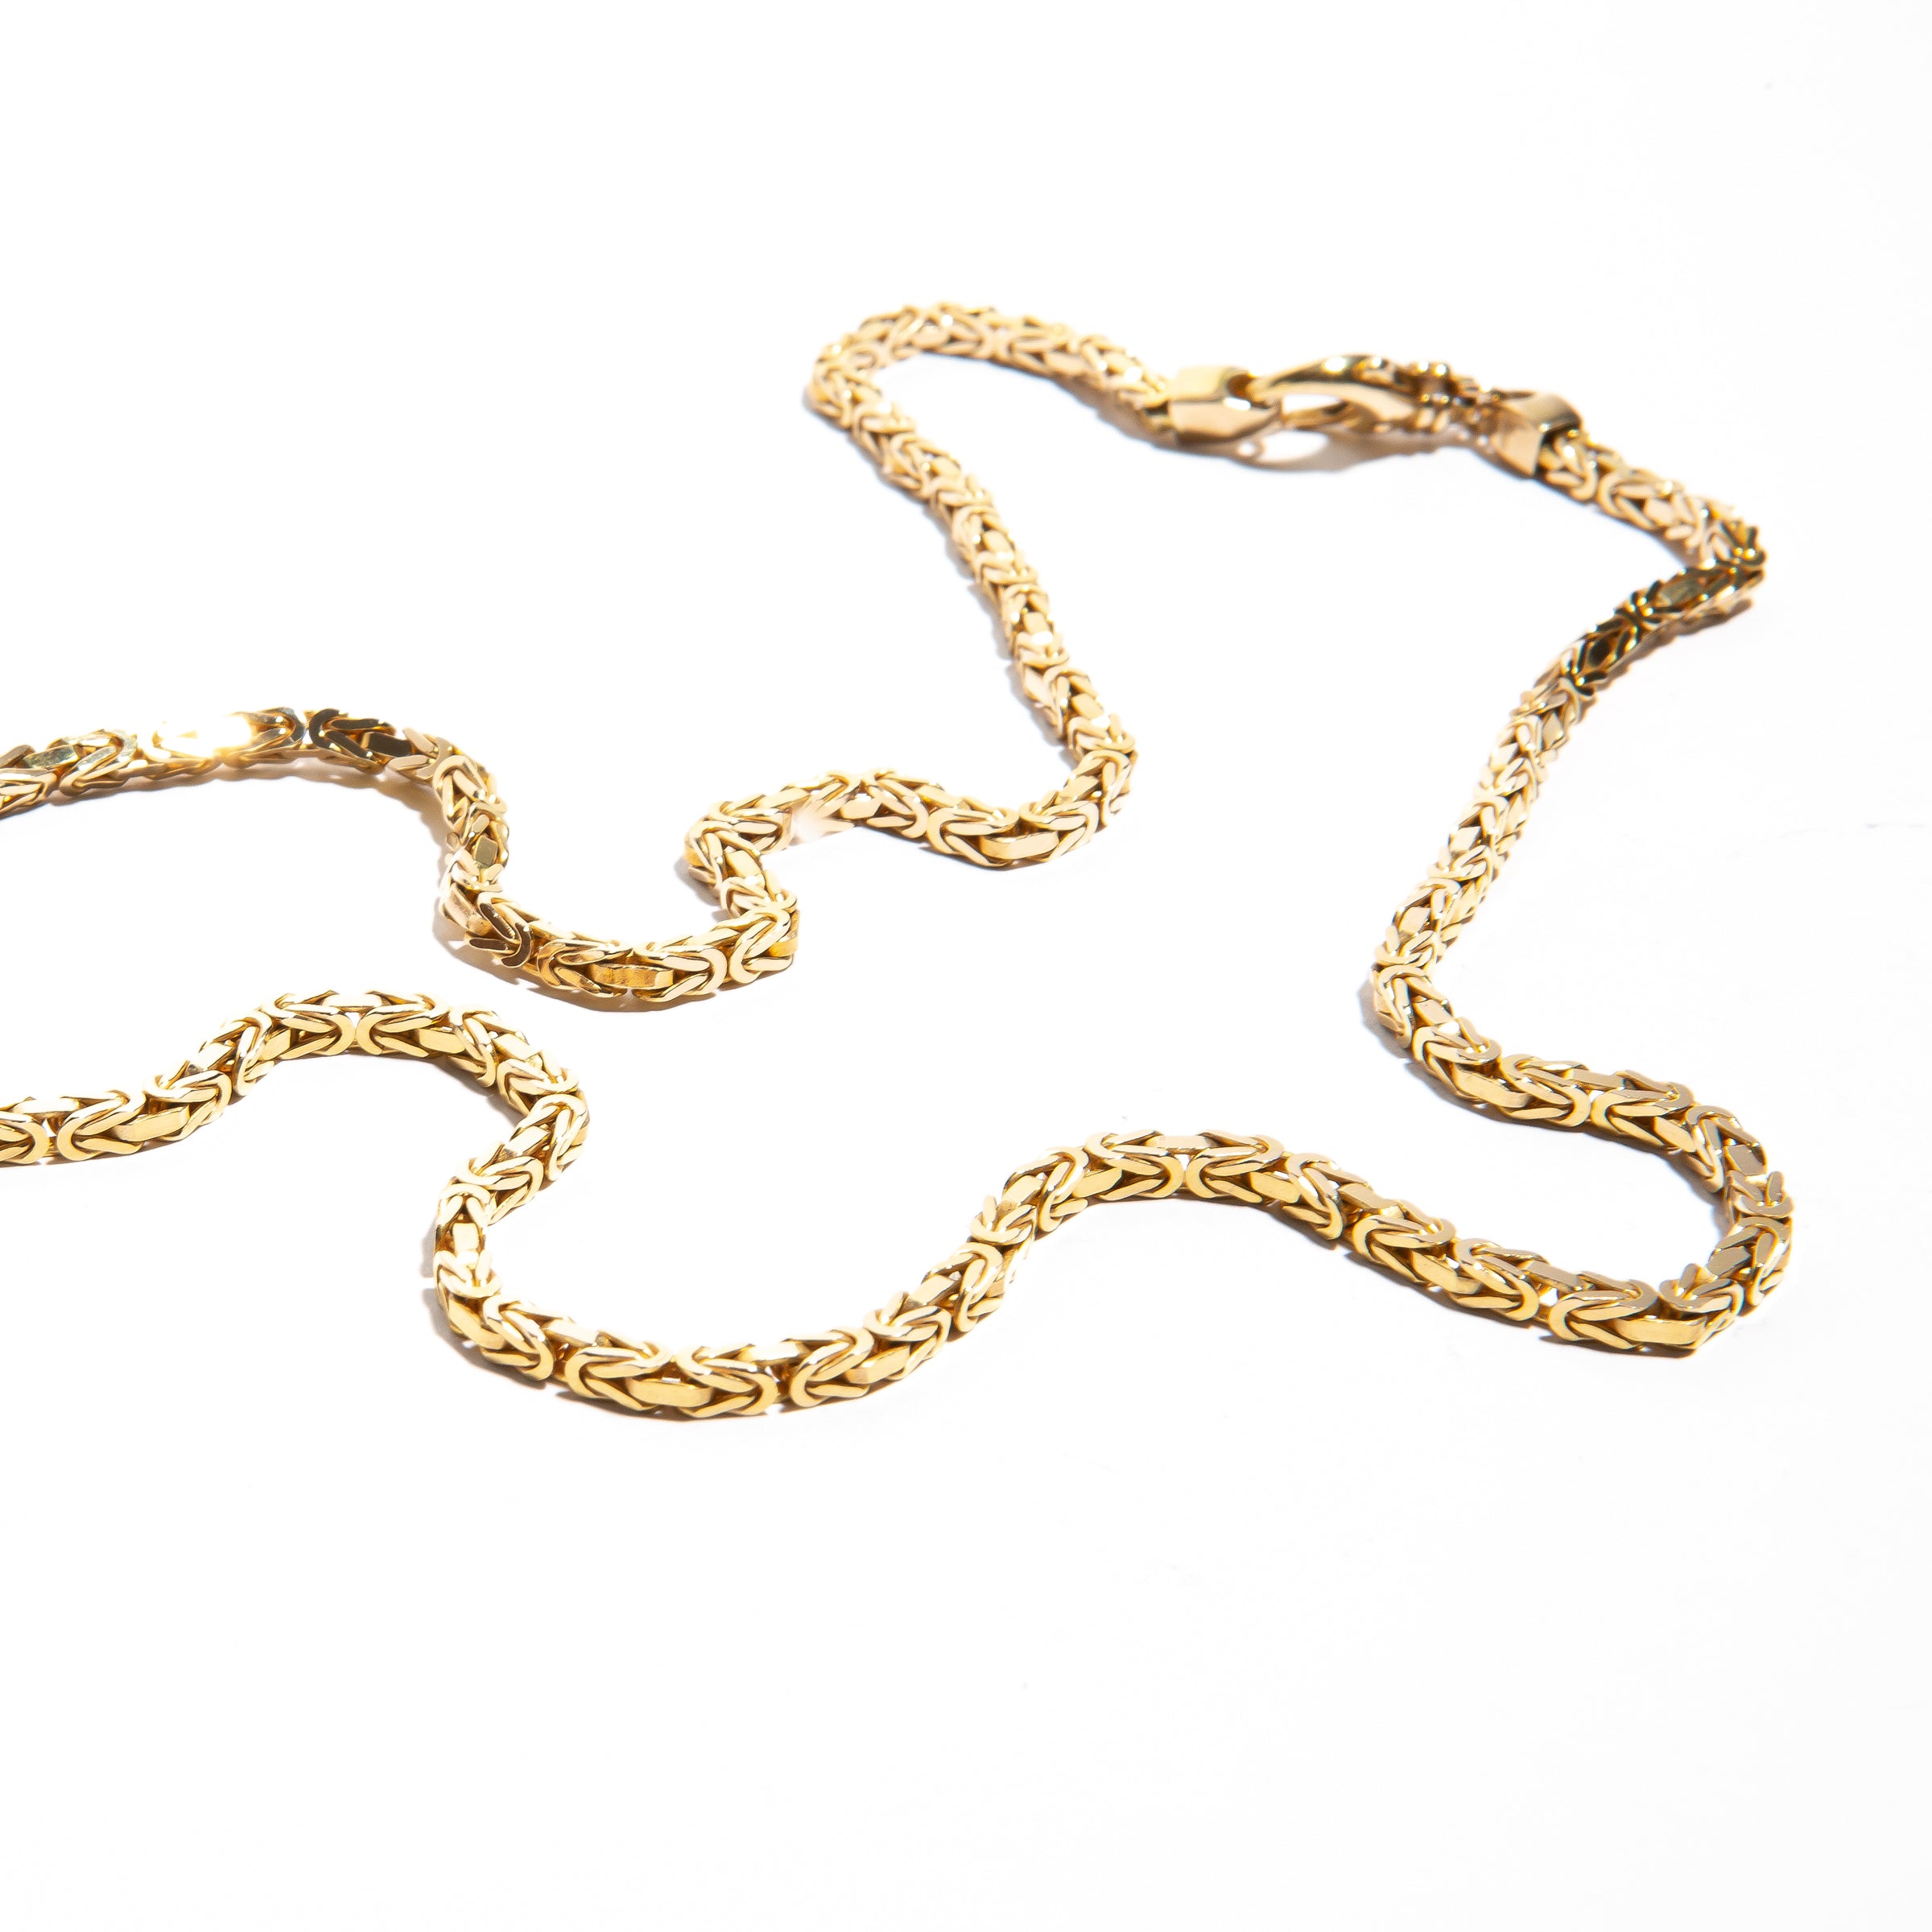 THE KING'S LINK: Vintage Byzantine Chain